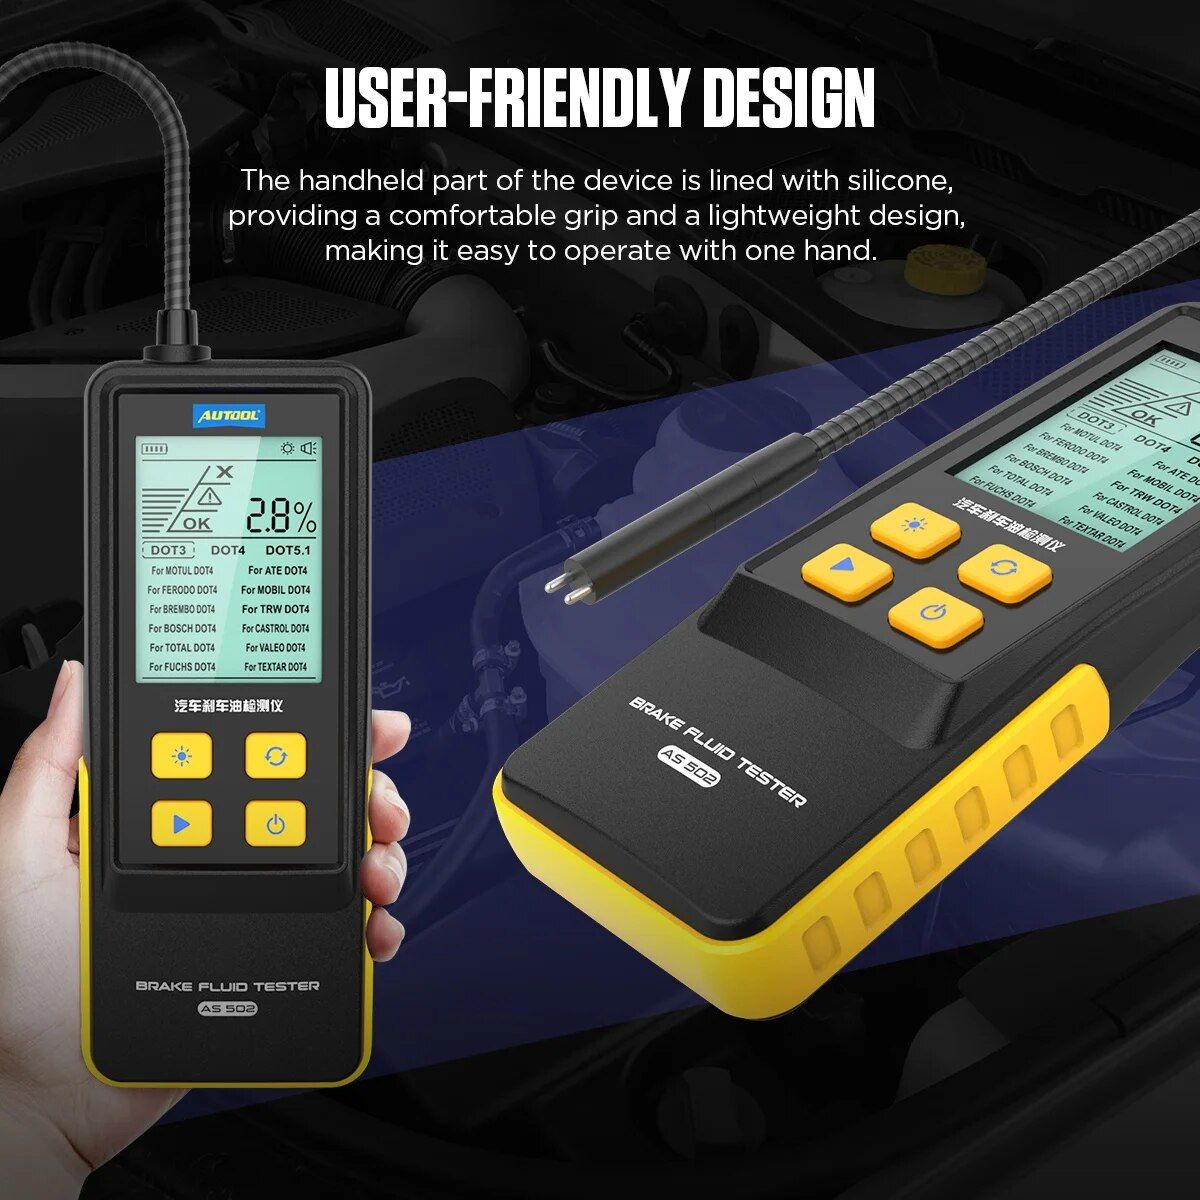 Advanced Brake Fluid Tester with Multi-Mode Detection and LED Display 